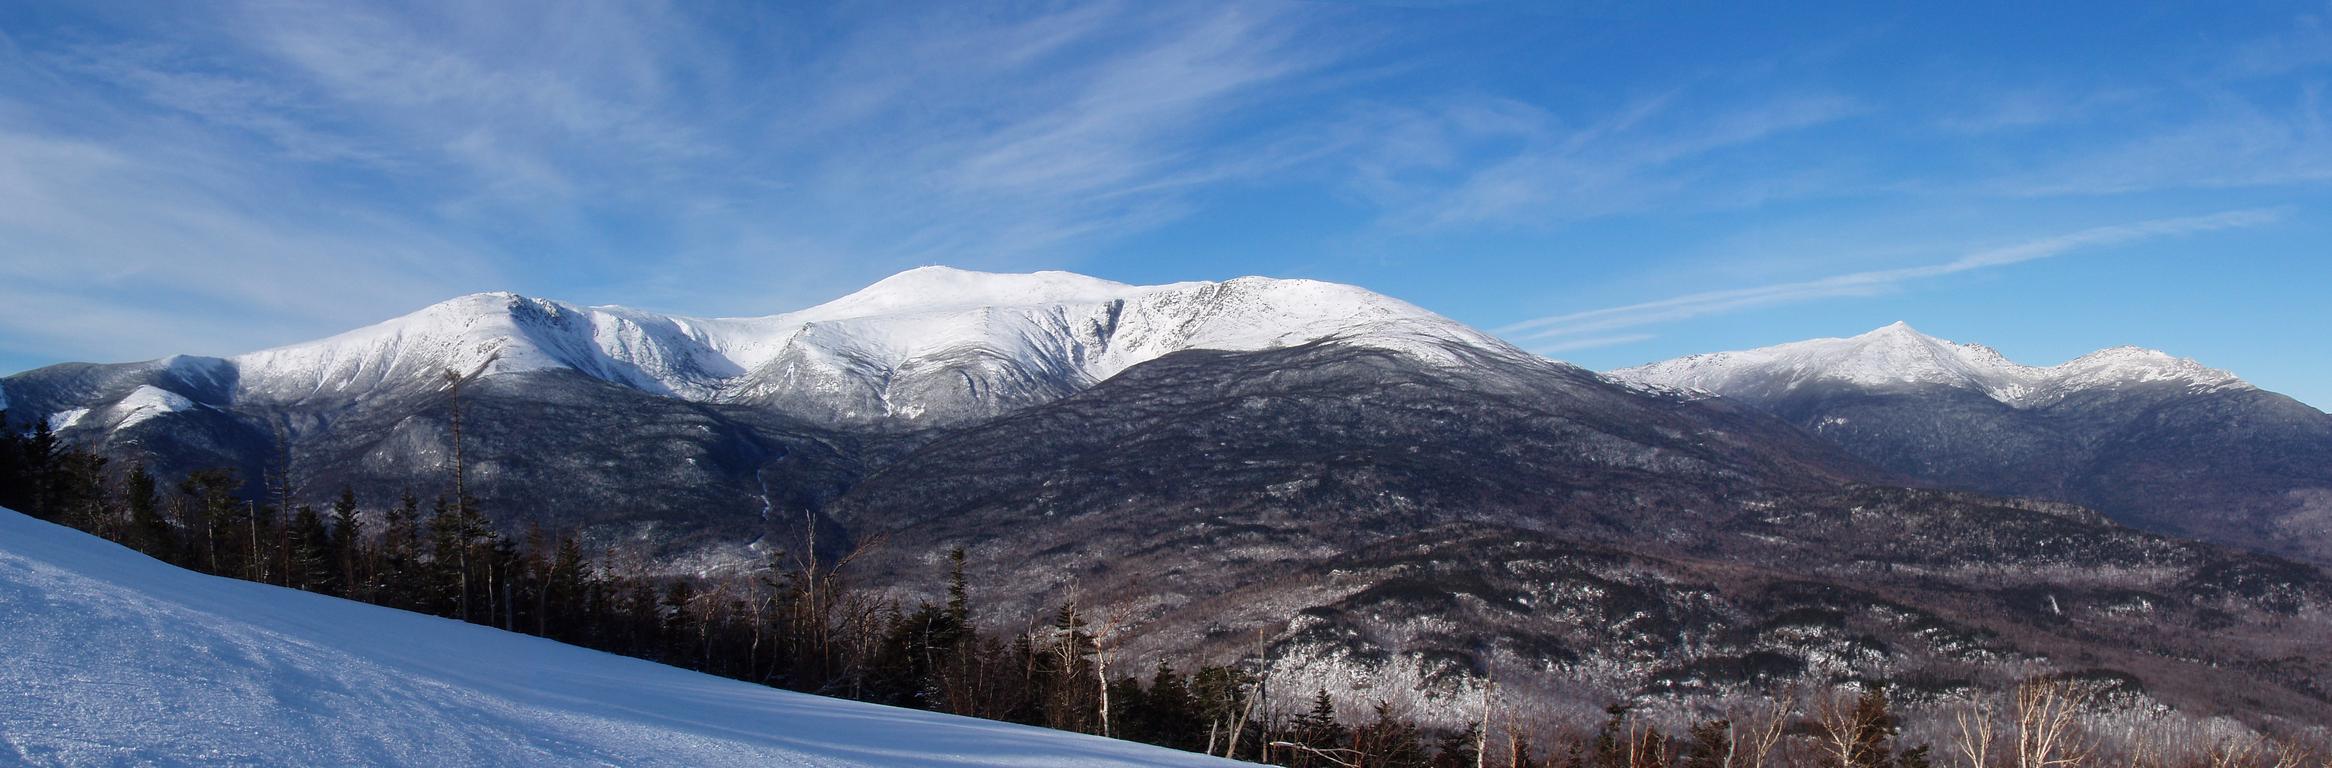 panoramic view of the Northern Presidentail Mountains in January as seen from Wildcat Mountain in New Hampshire